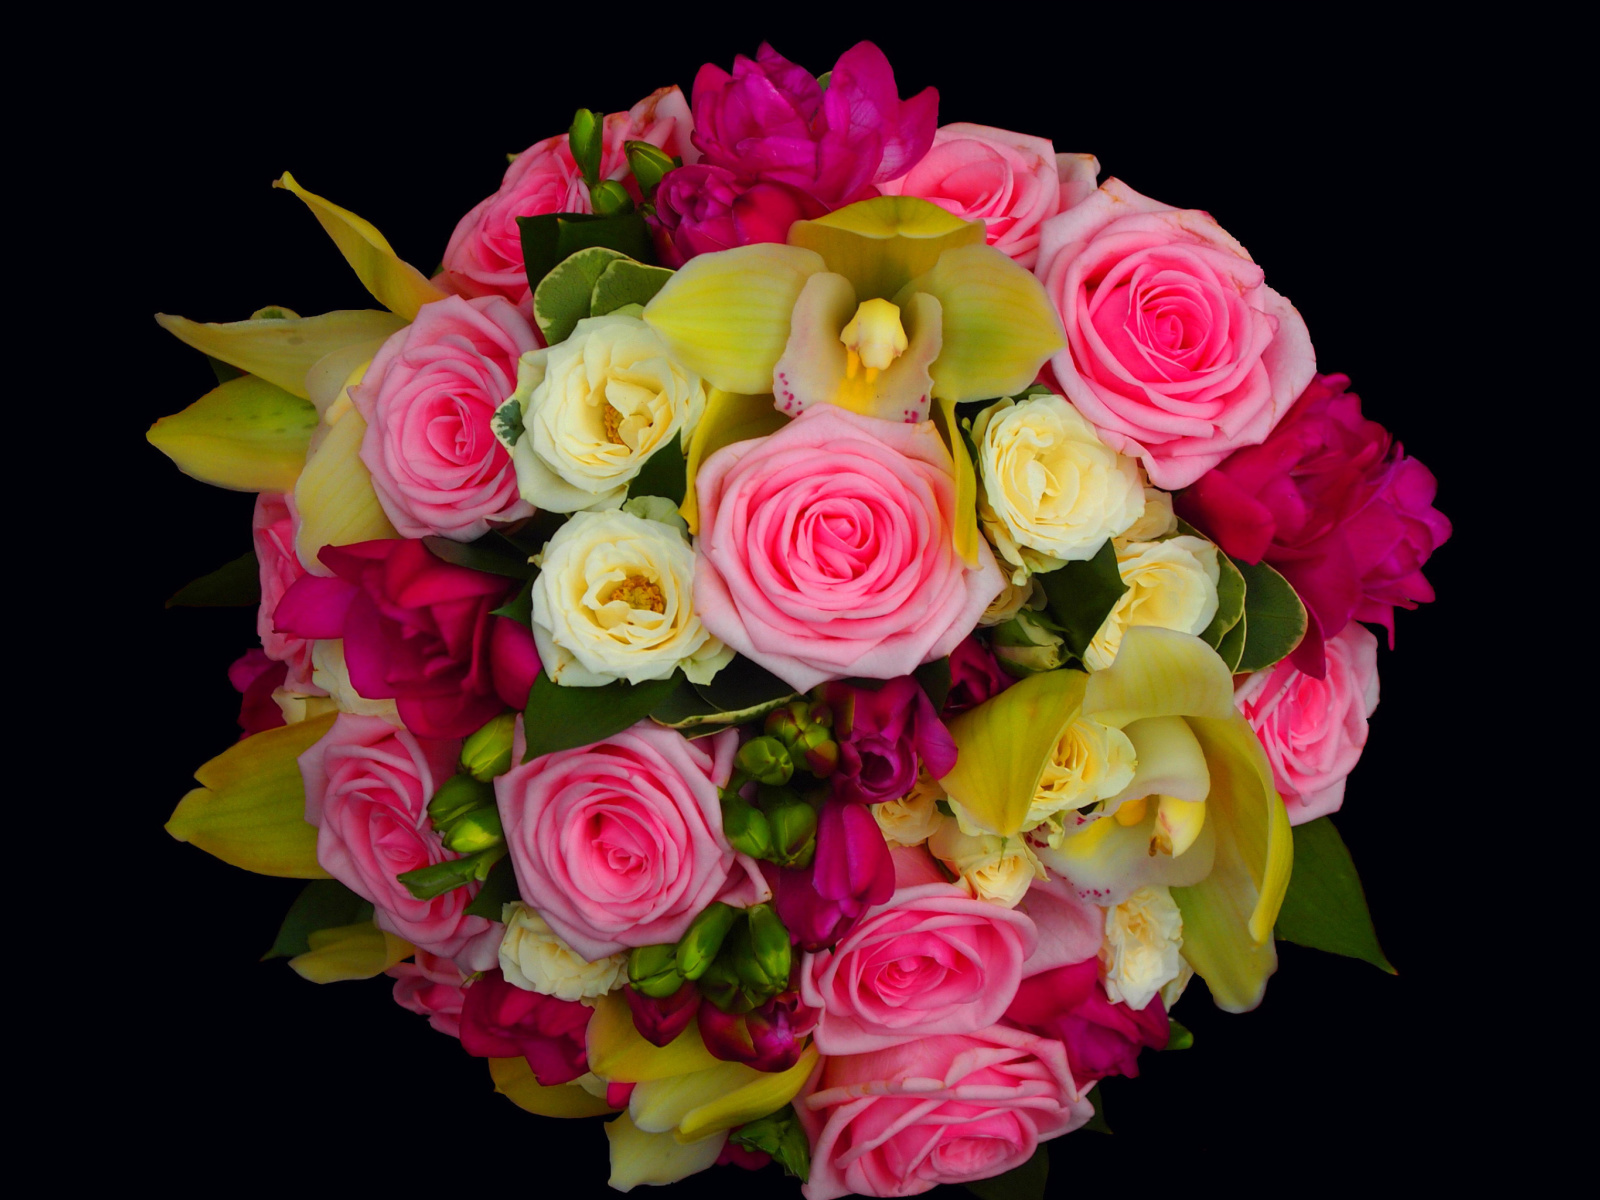 Bouquet of roses and yellow orchid, floristry wallpaper 1600x1200